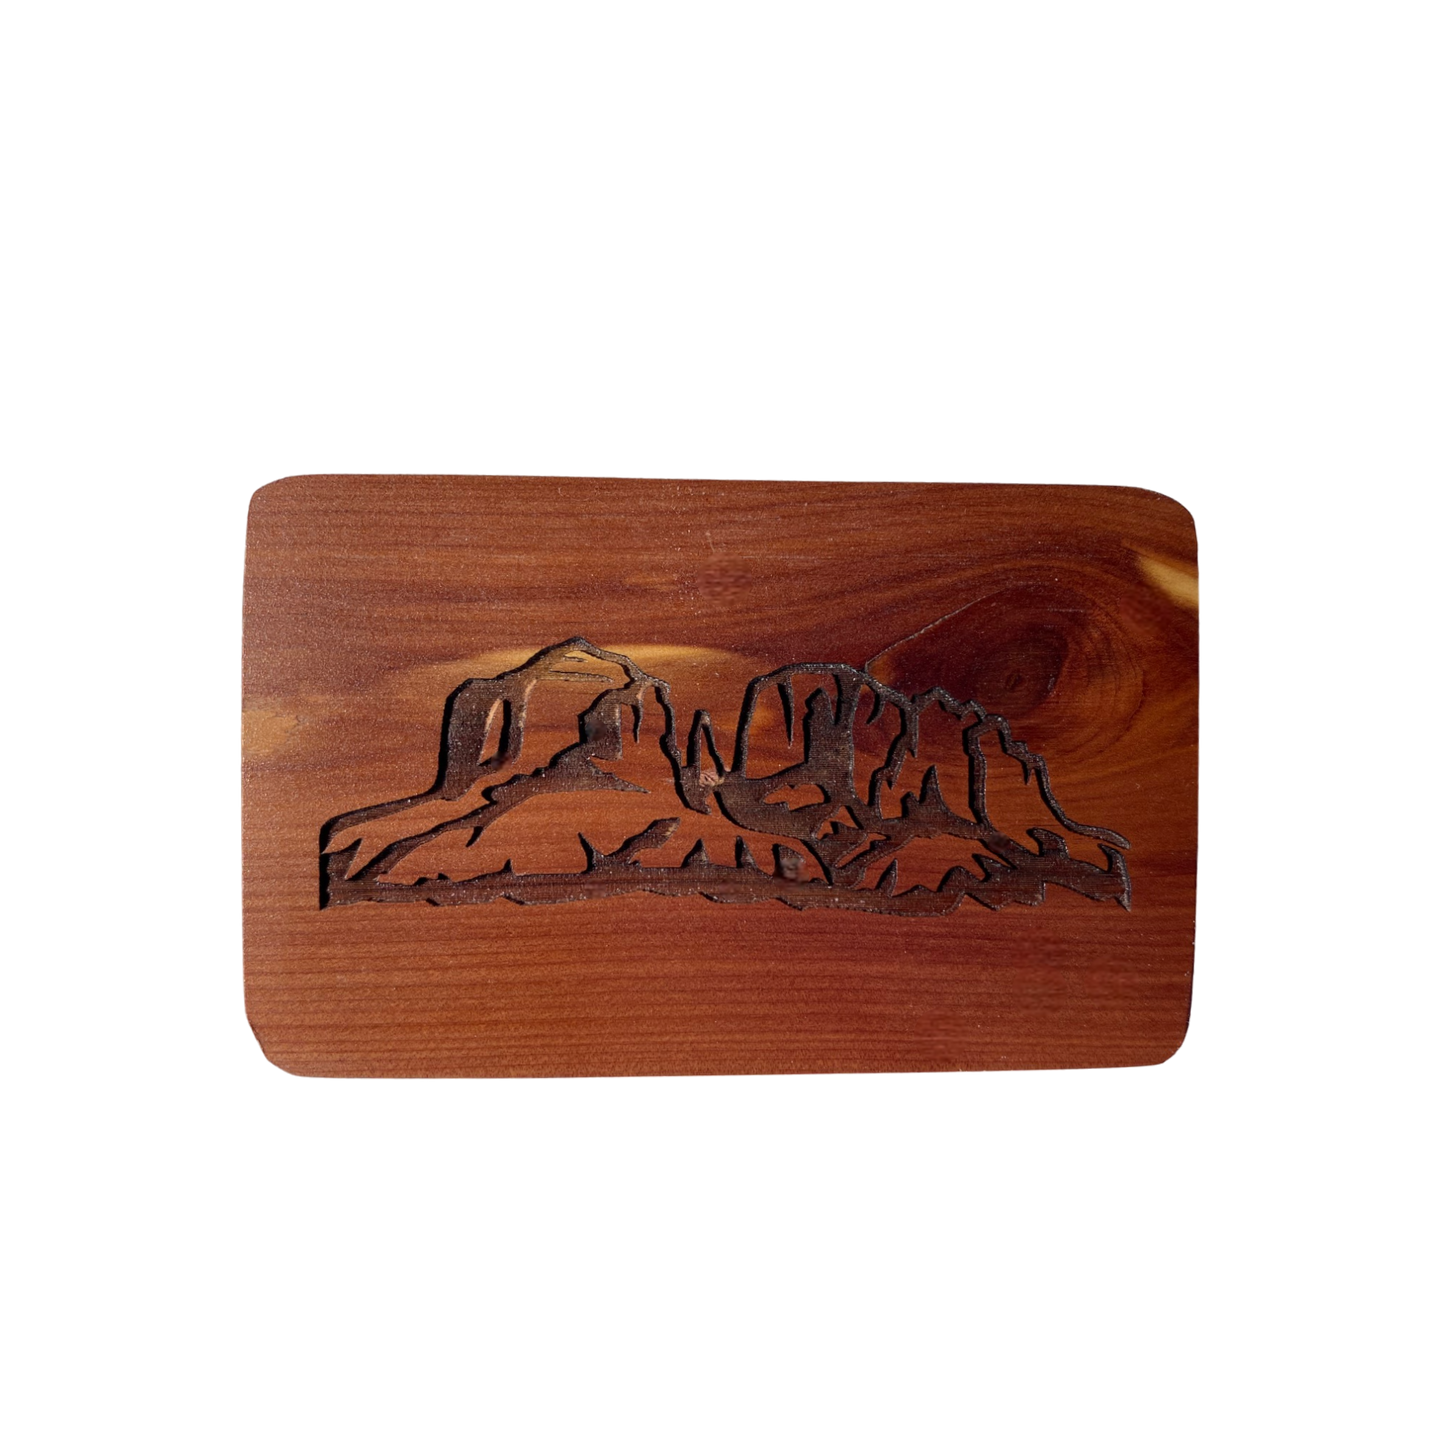 Box-Beautiful Cedar Small Item Keepsake box with Engraved Sedona Cathedral Rock Outline